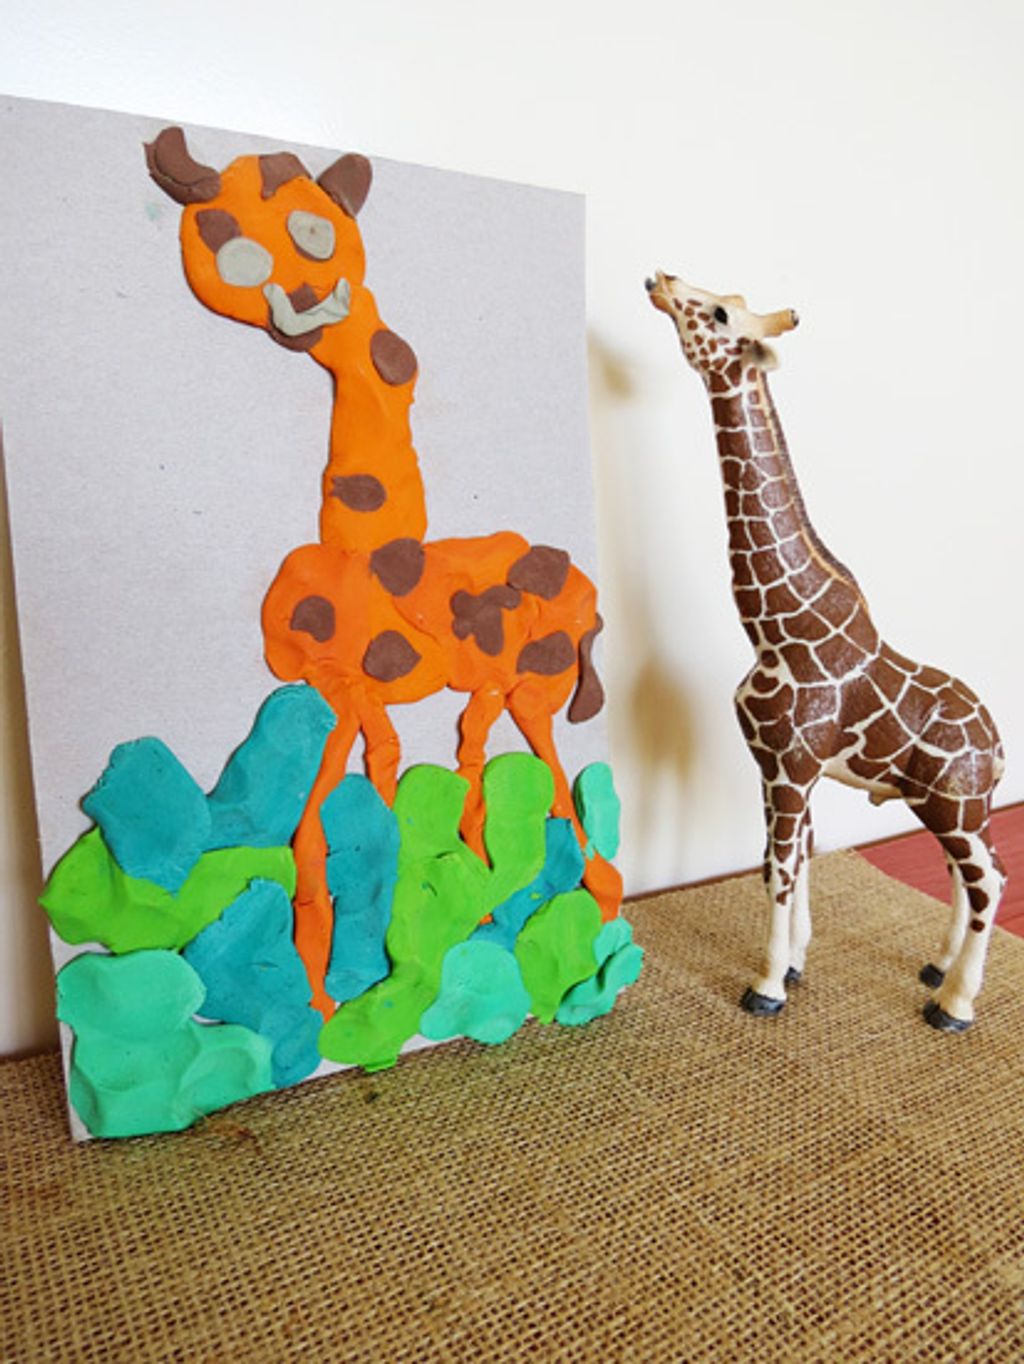 Art-for-kids_Modelling-Clay-Pictures-via-Childhood-101